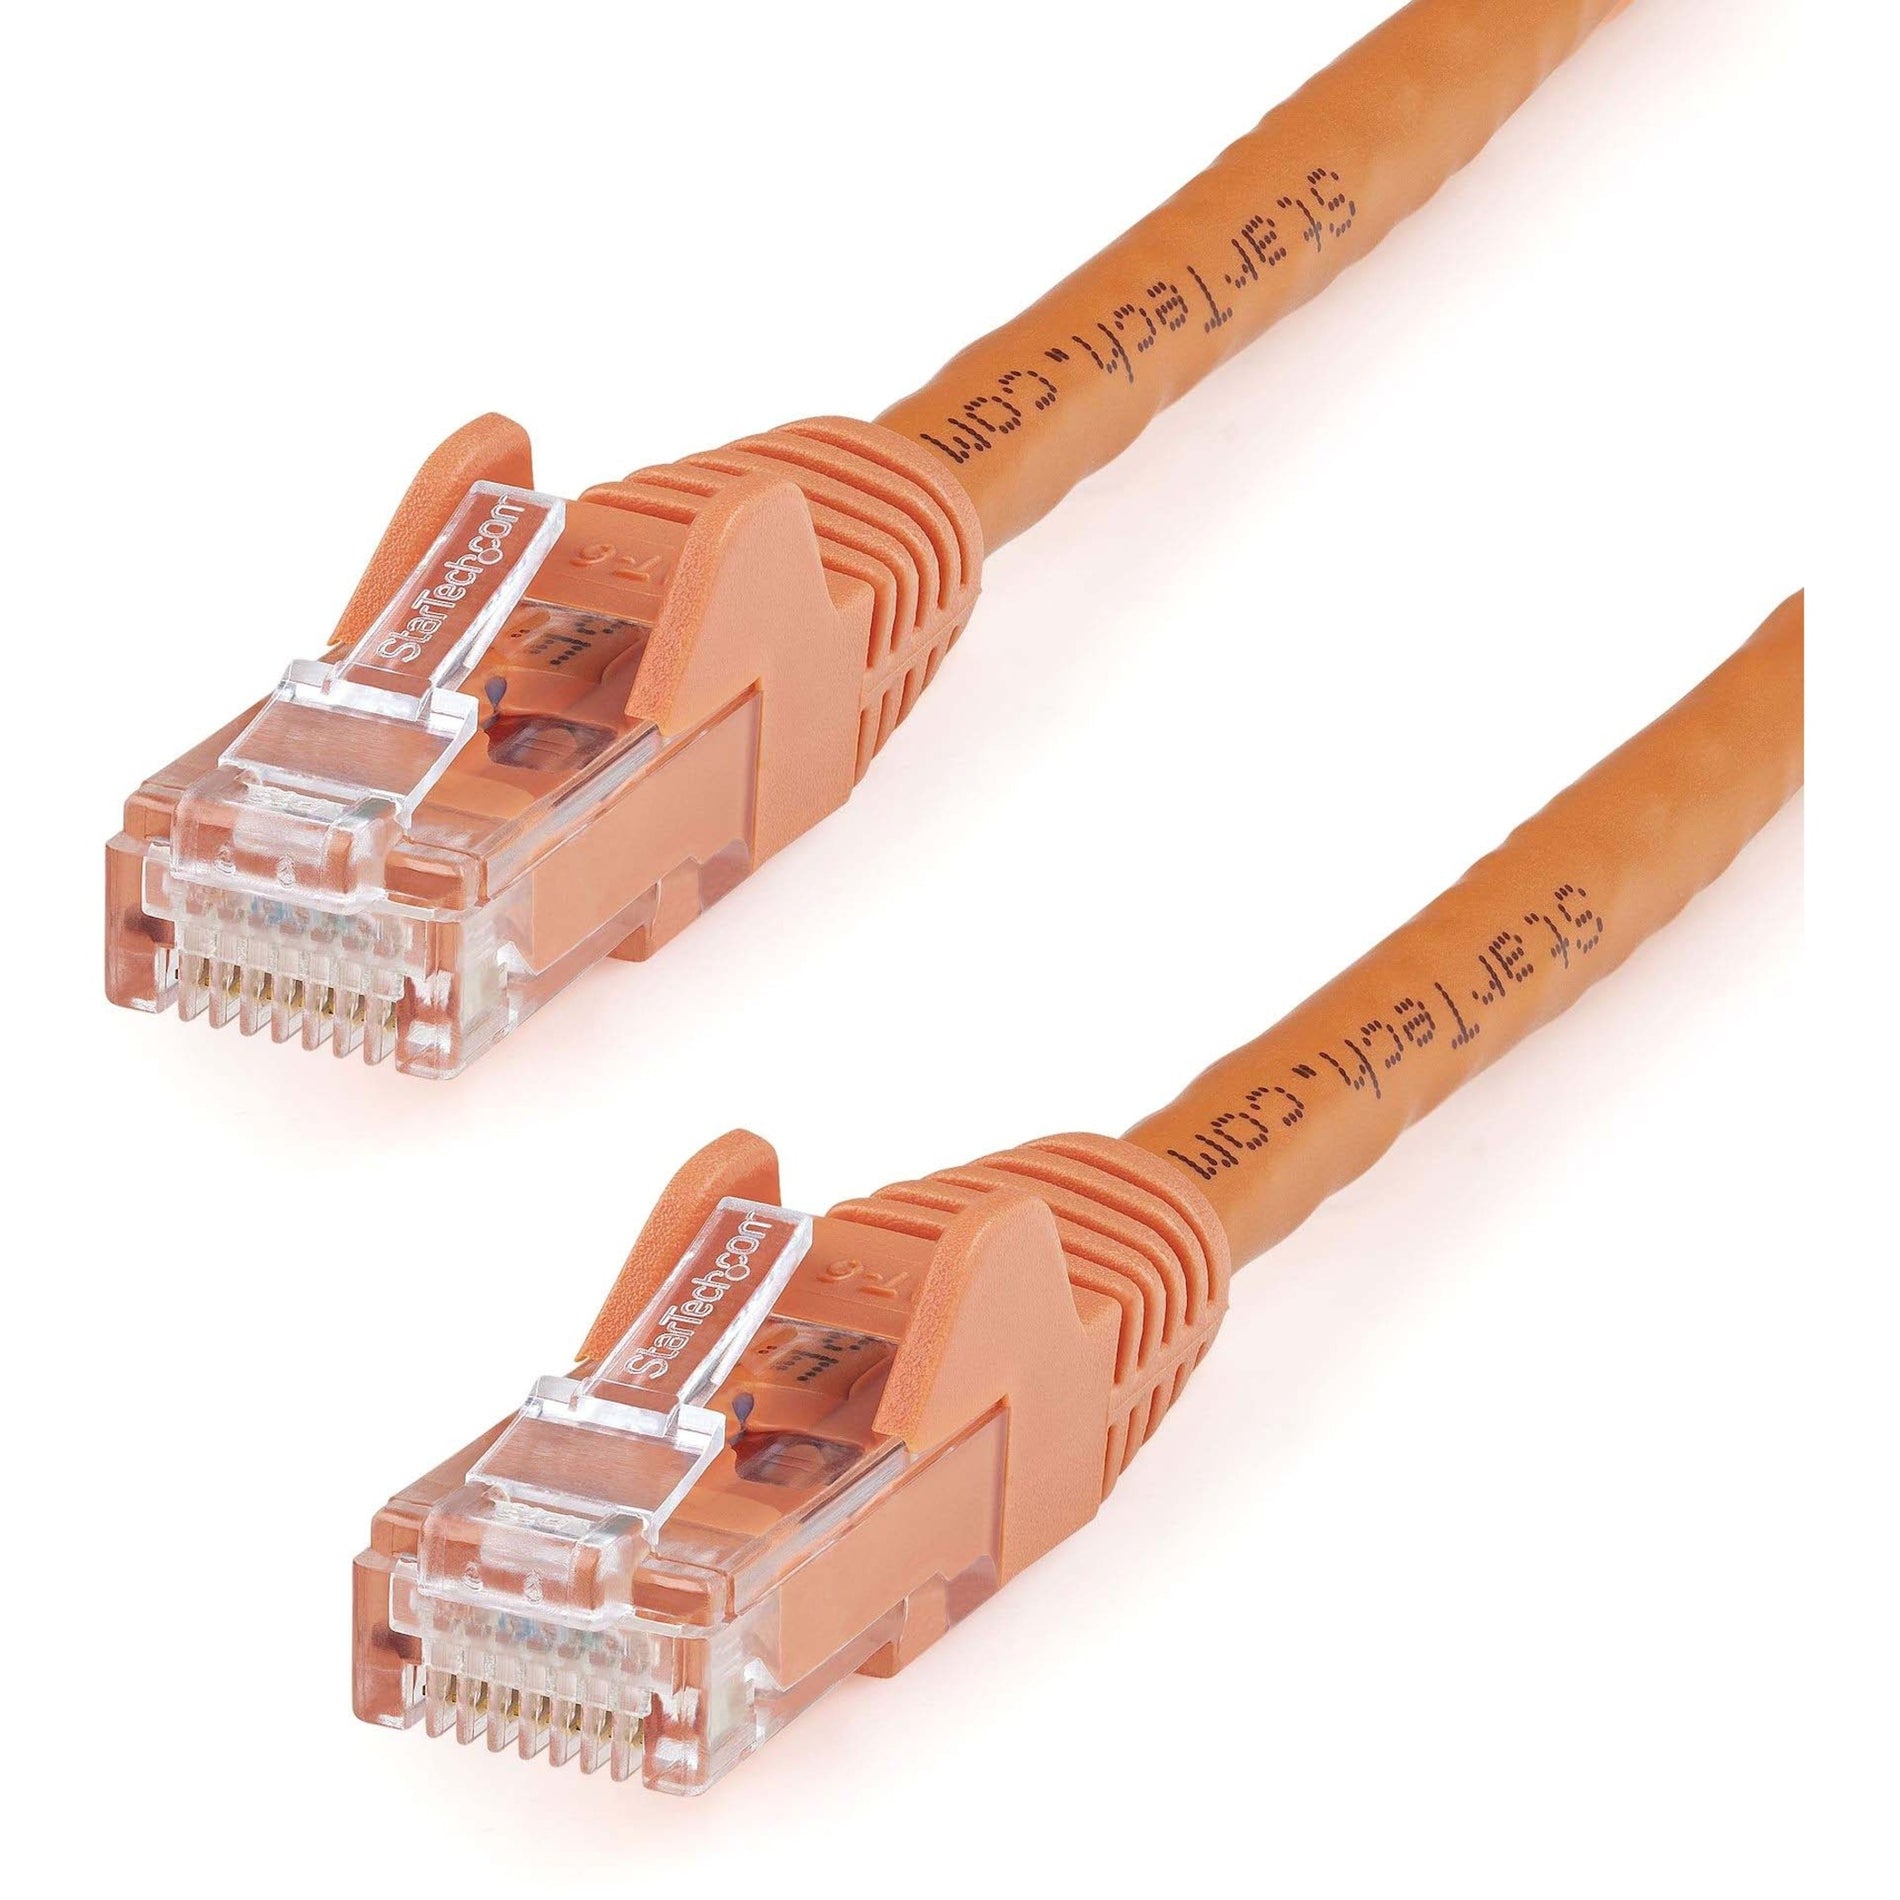 StarTech.com N6PATCH3OR 3 ft Orange Snagless Cat6 UTP Patch Cable Lifetime Warranty 10 Gbit/s Data Transfer Rate